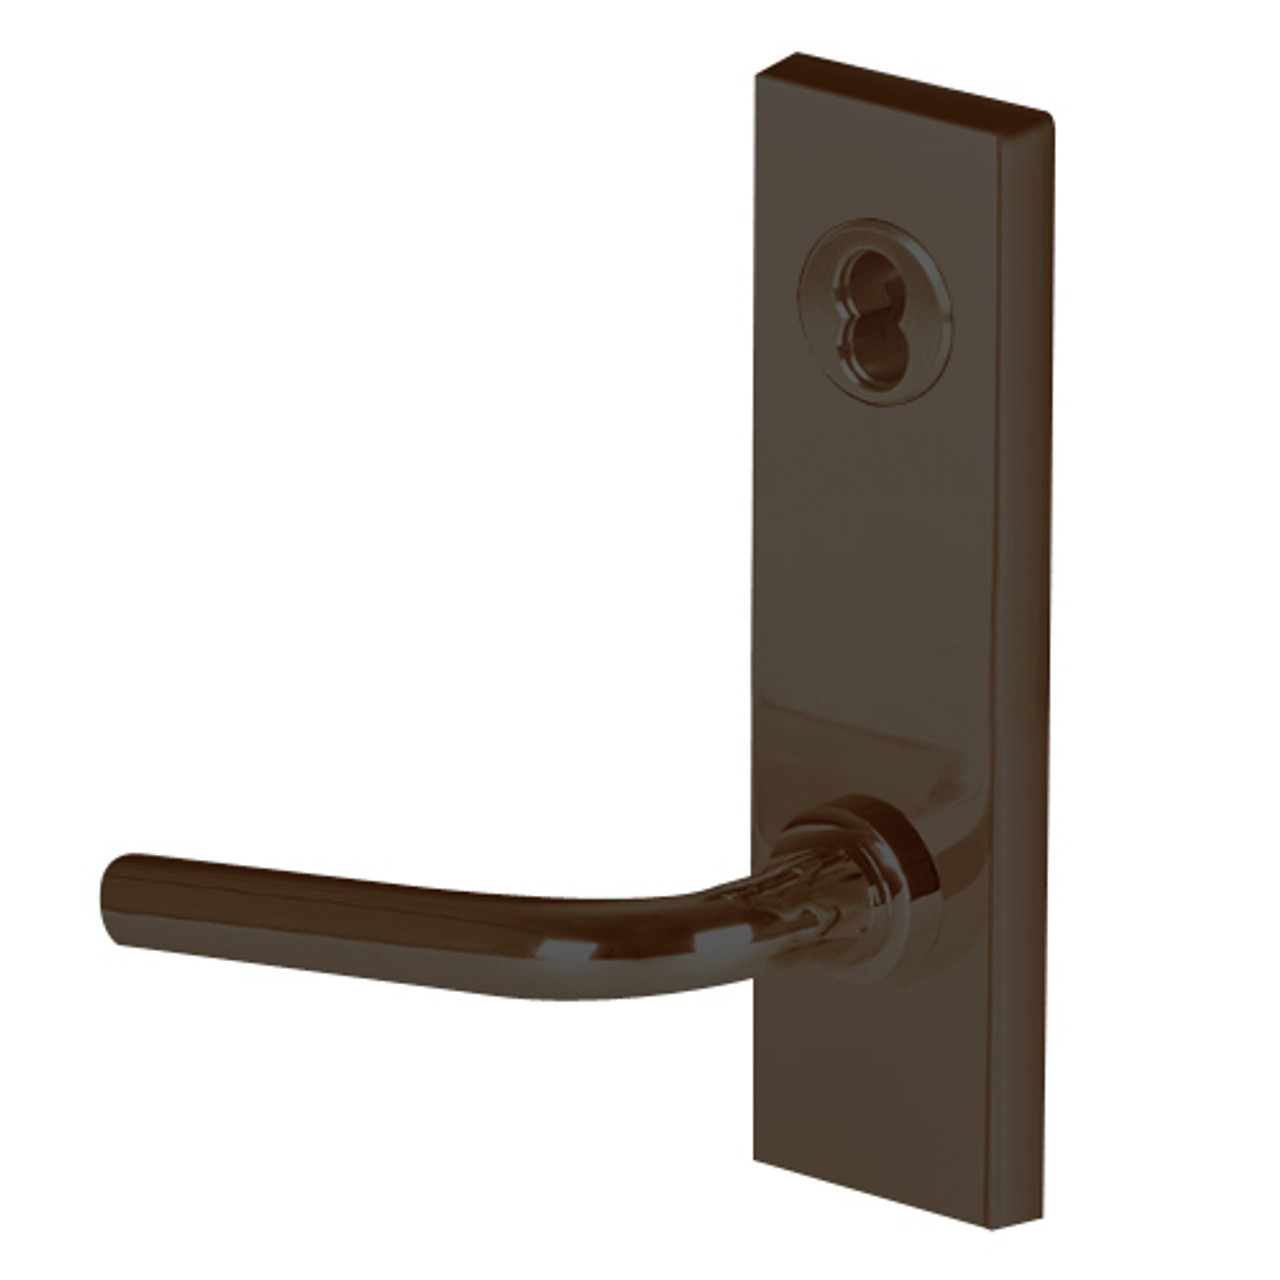 45H7INL12M613 Best 40H Series Intruder without Deadbolt Heavy Duty Mortise Lever Lock with Solid Tube with No Return in Oil Rubbed Bronze